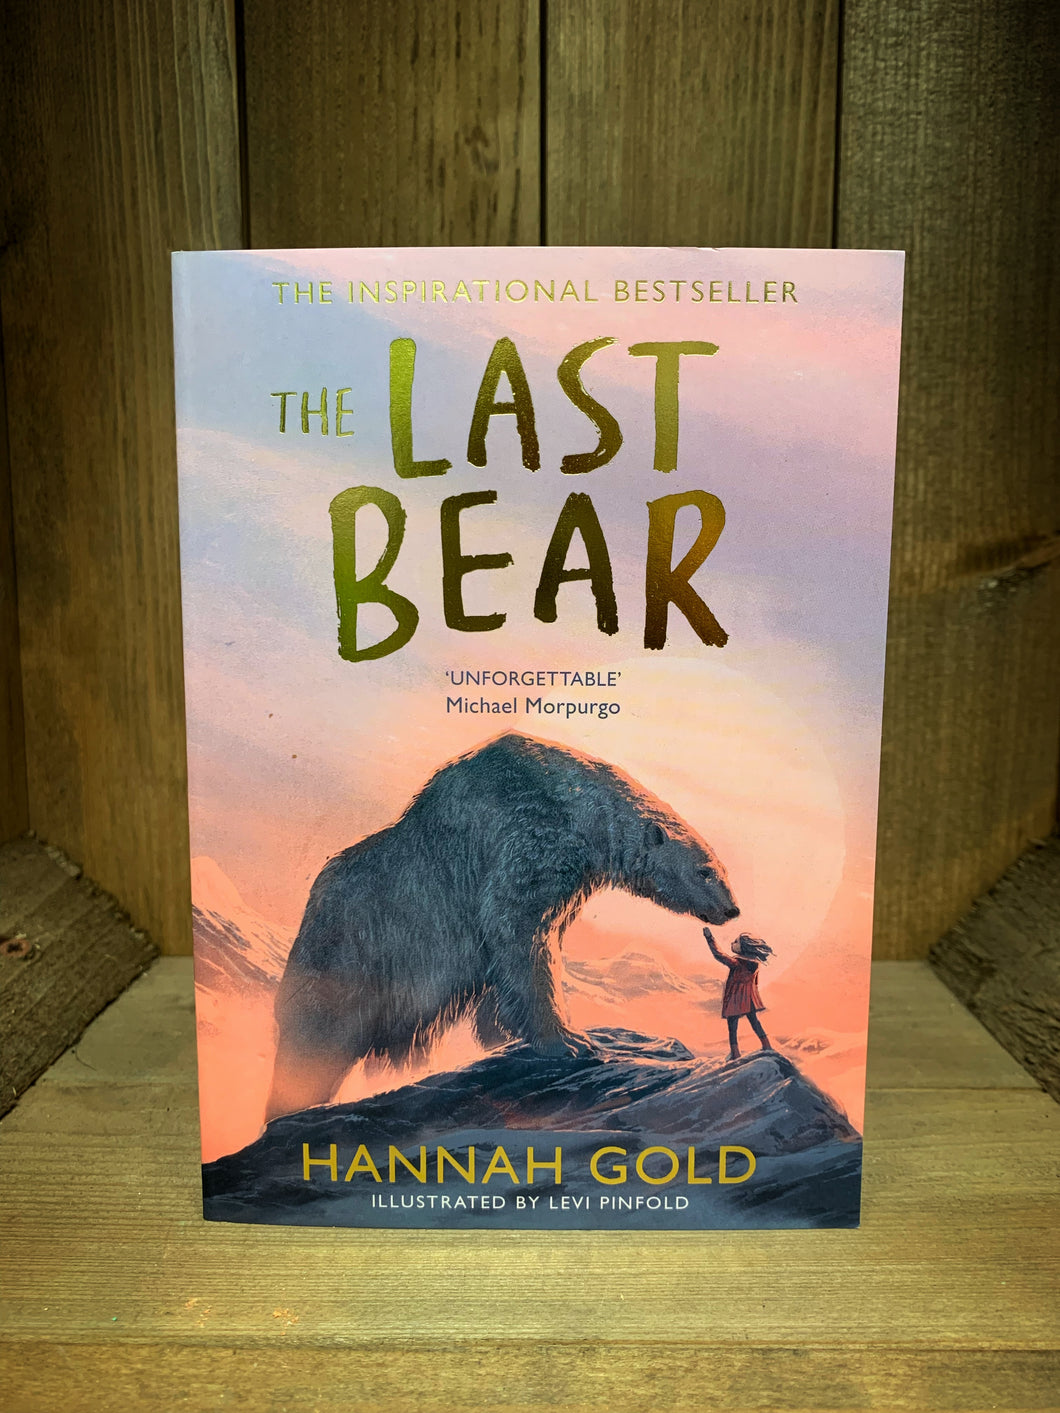 Image of the front cover of the book The Last Bear. The cover shows an illustration of a girl and a polar bear standing on a mountaintop in front of a sunrise.